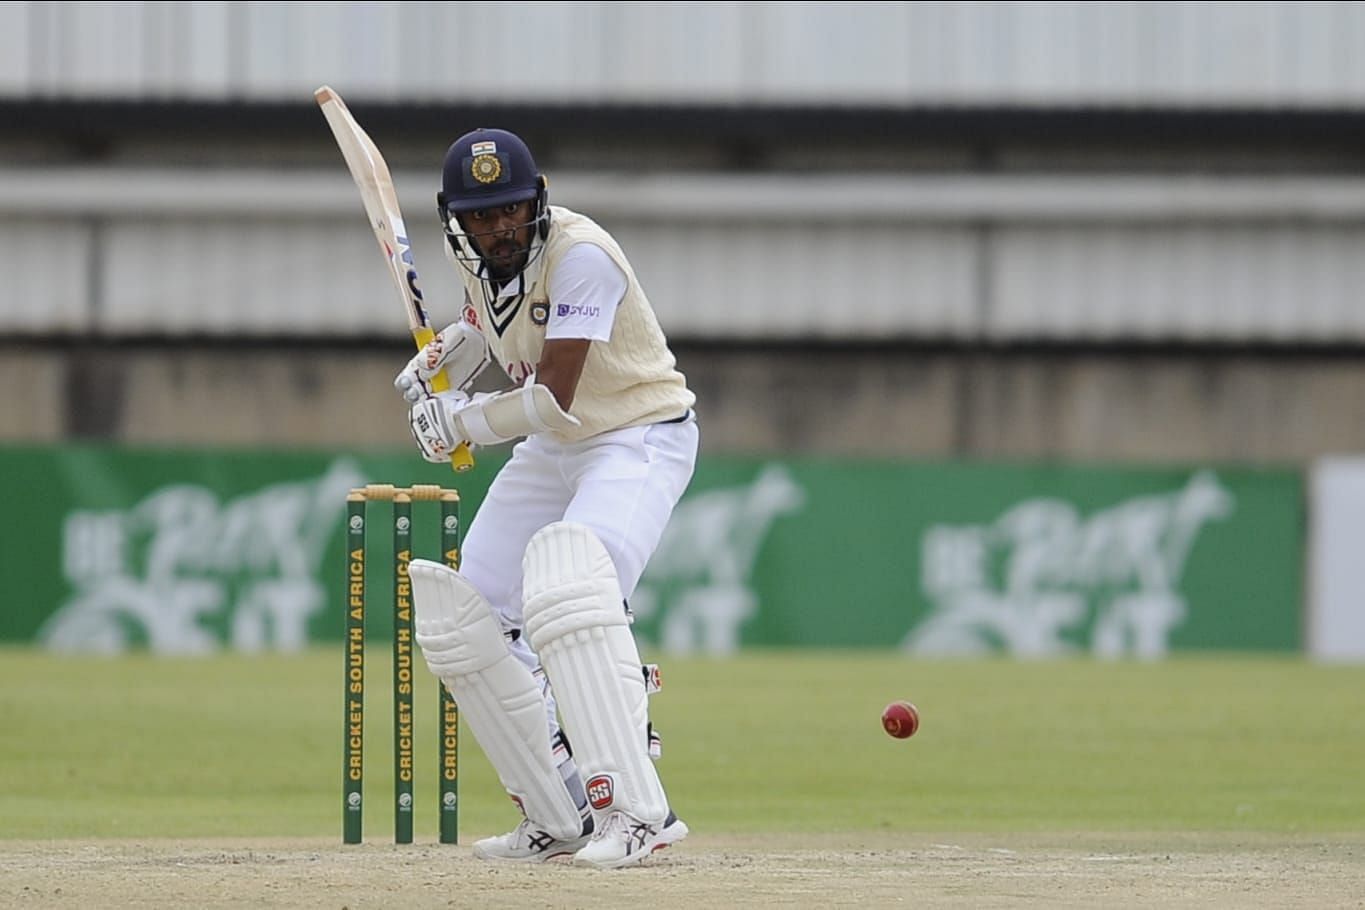 Abhimanyu Easwaran has scored 4,841 runs at an average of 43.22 in 70 first-class games [Credits: BCCI]